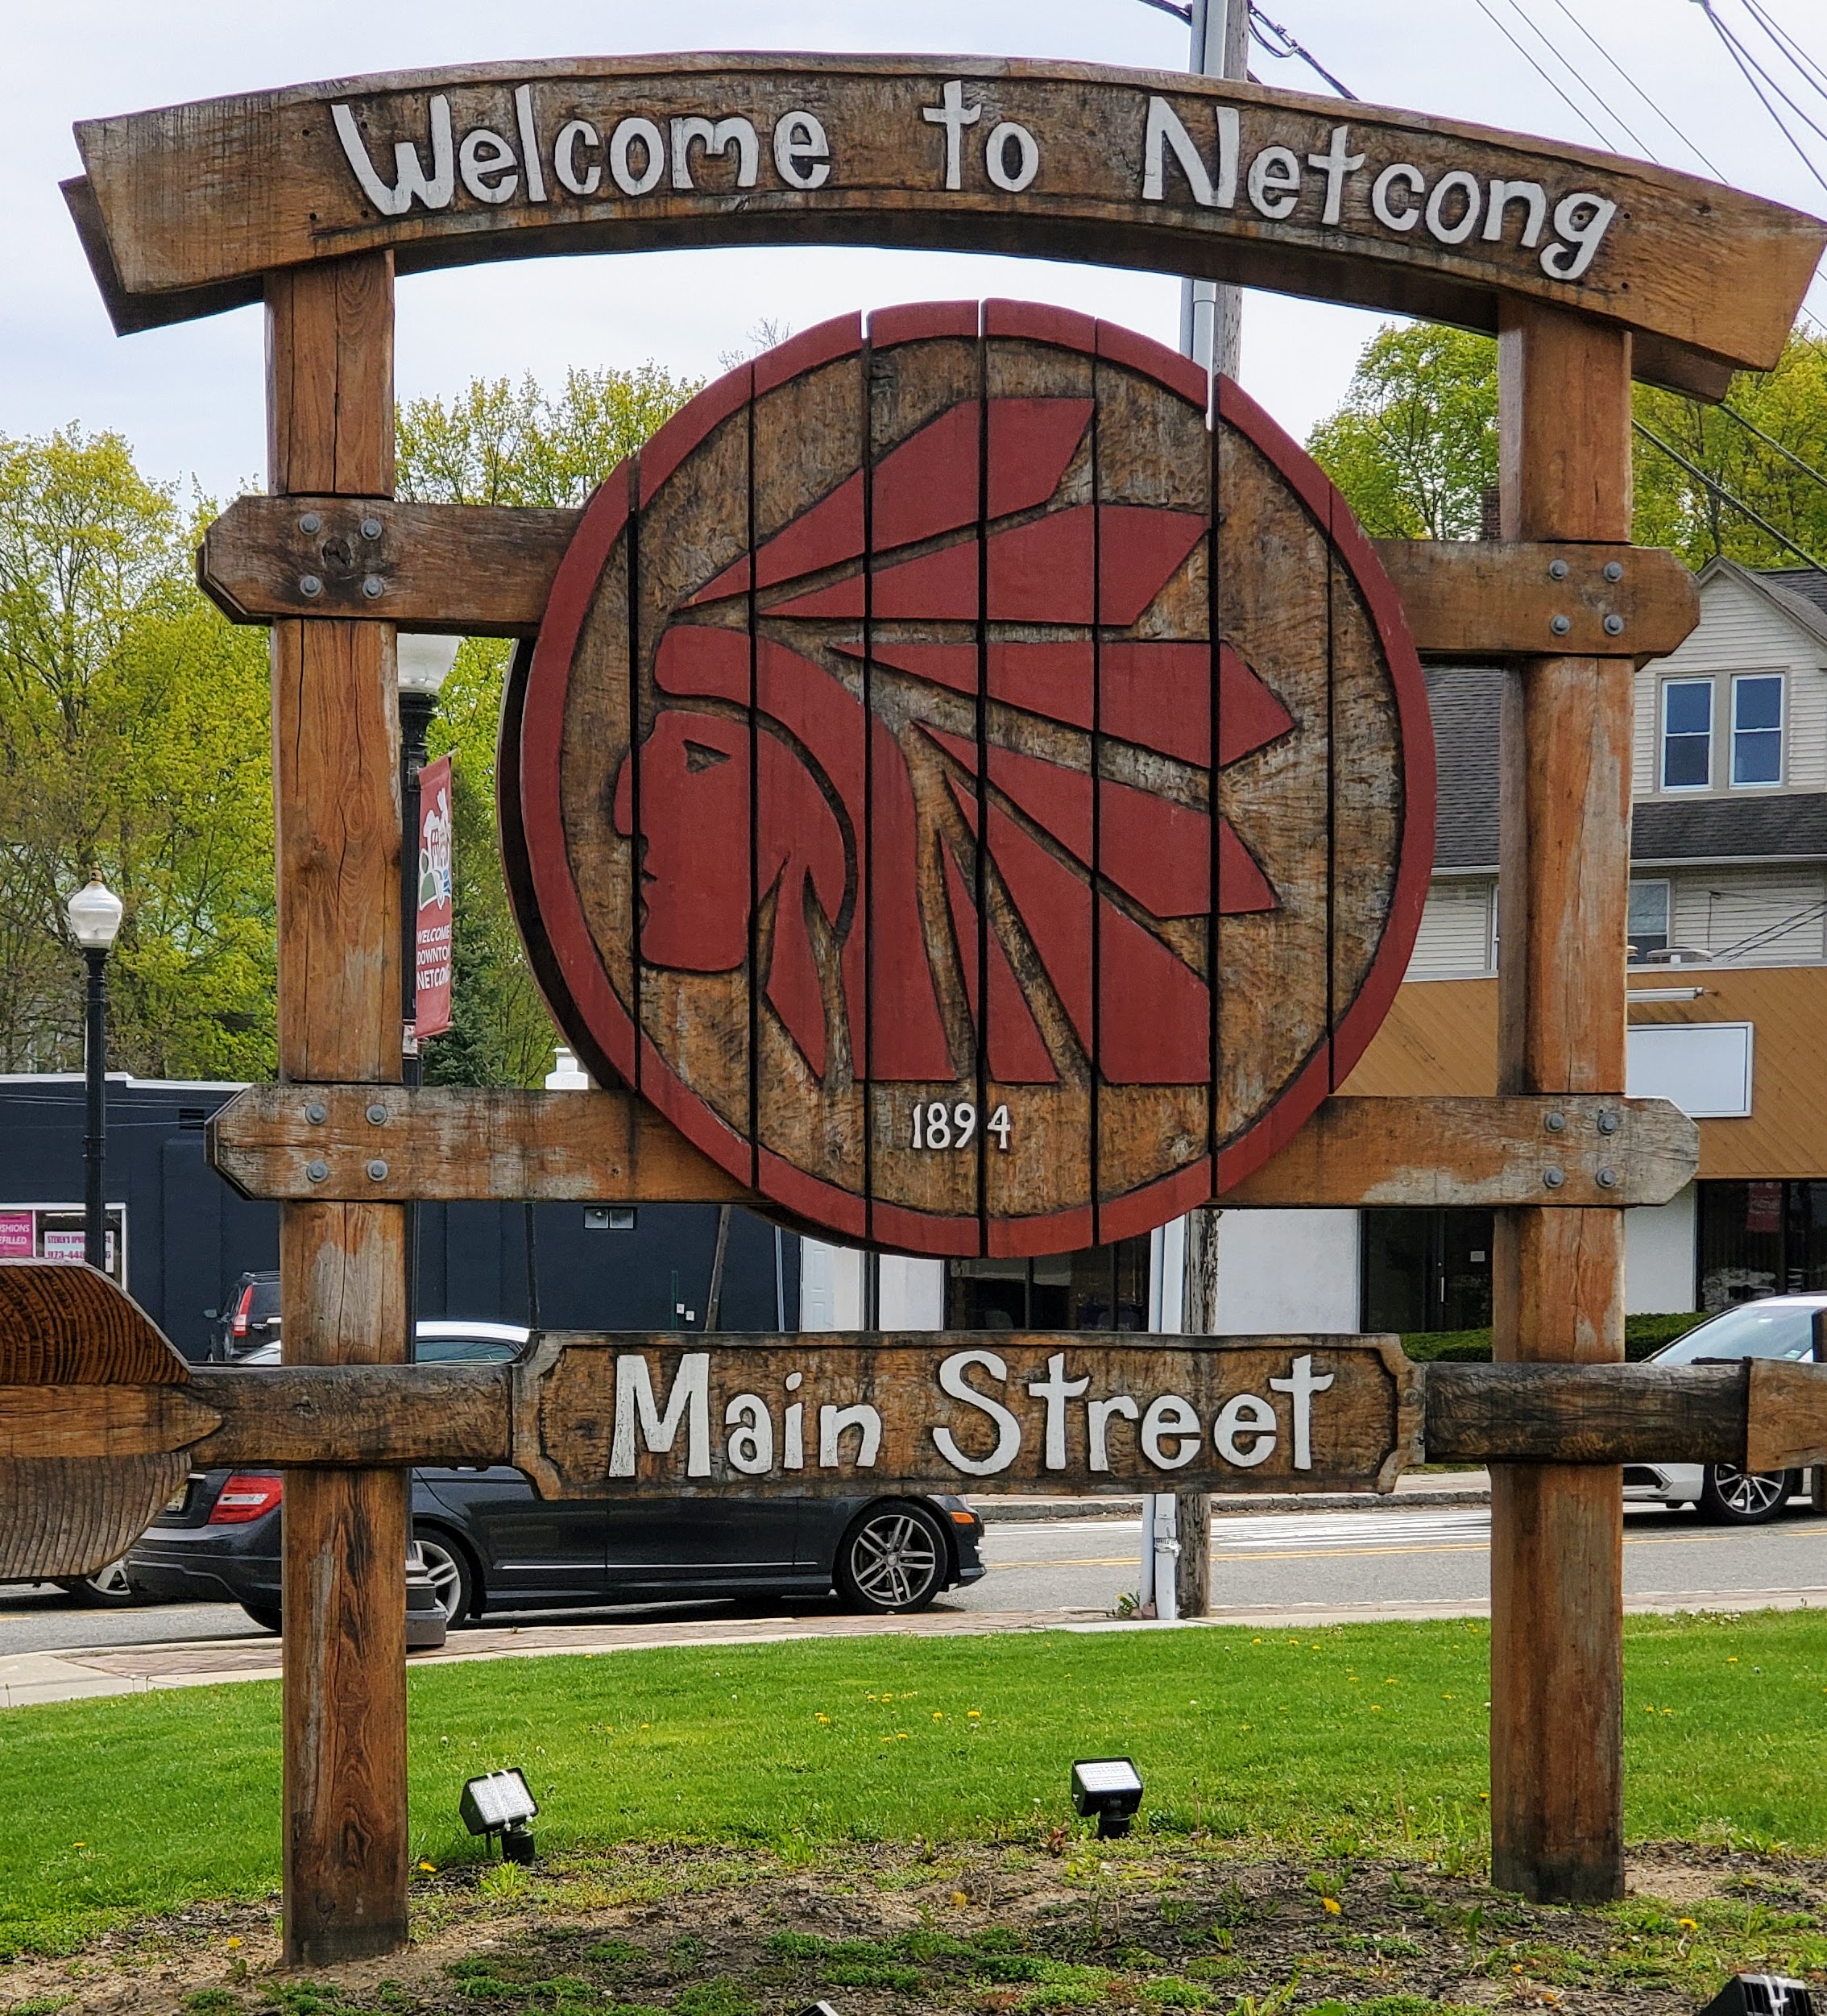 The Netcong Sign